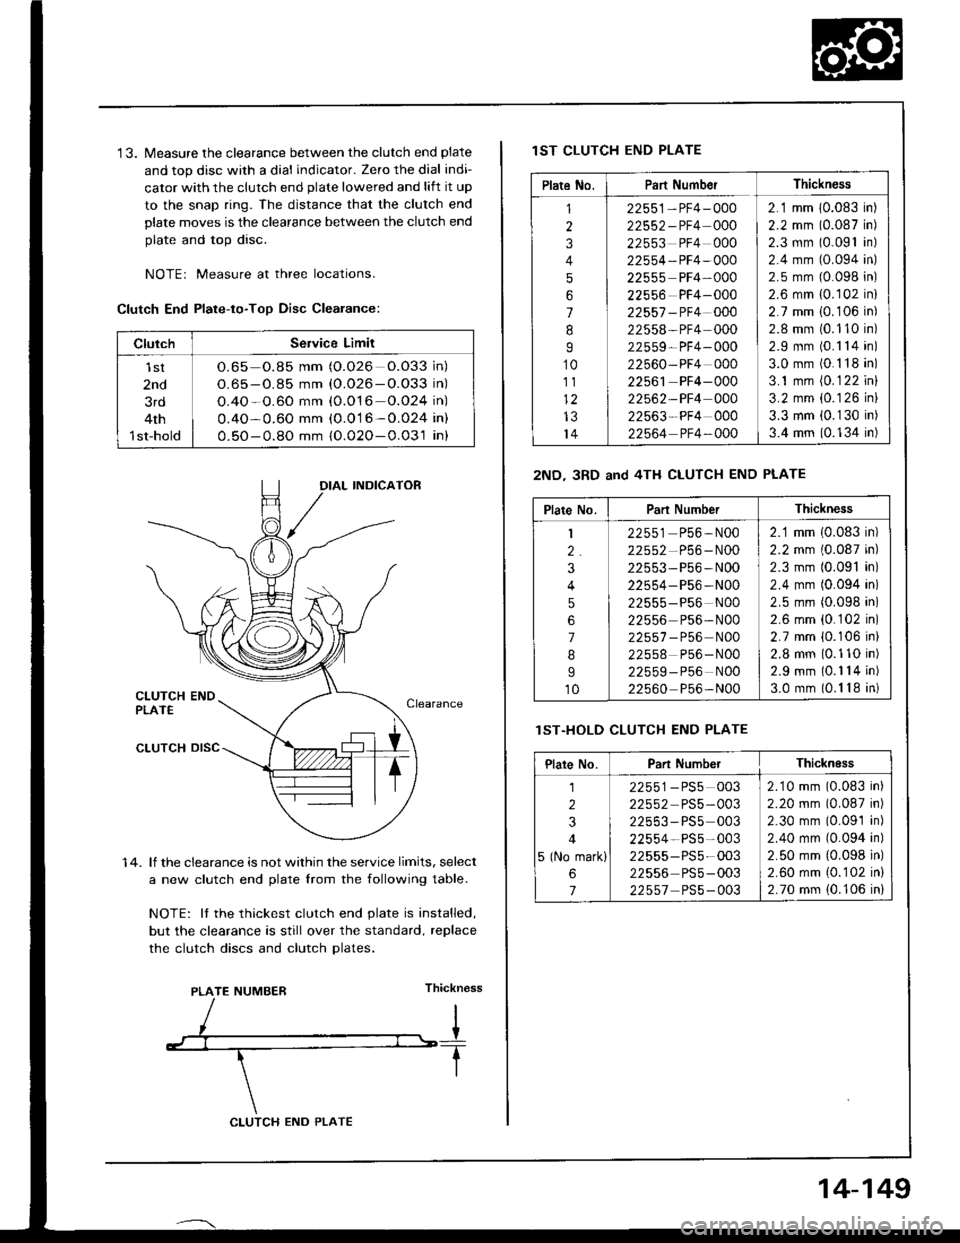 ACURA INTEGRA 1994  Service Owners Manual 13. Measure the clearance between the clutch end plate
and top disc with a dial indicator. Zero the dial indi-
cator with the clutch end plate lowered and lift it up
to the snap ring. The distance th